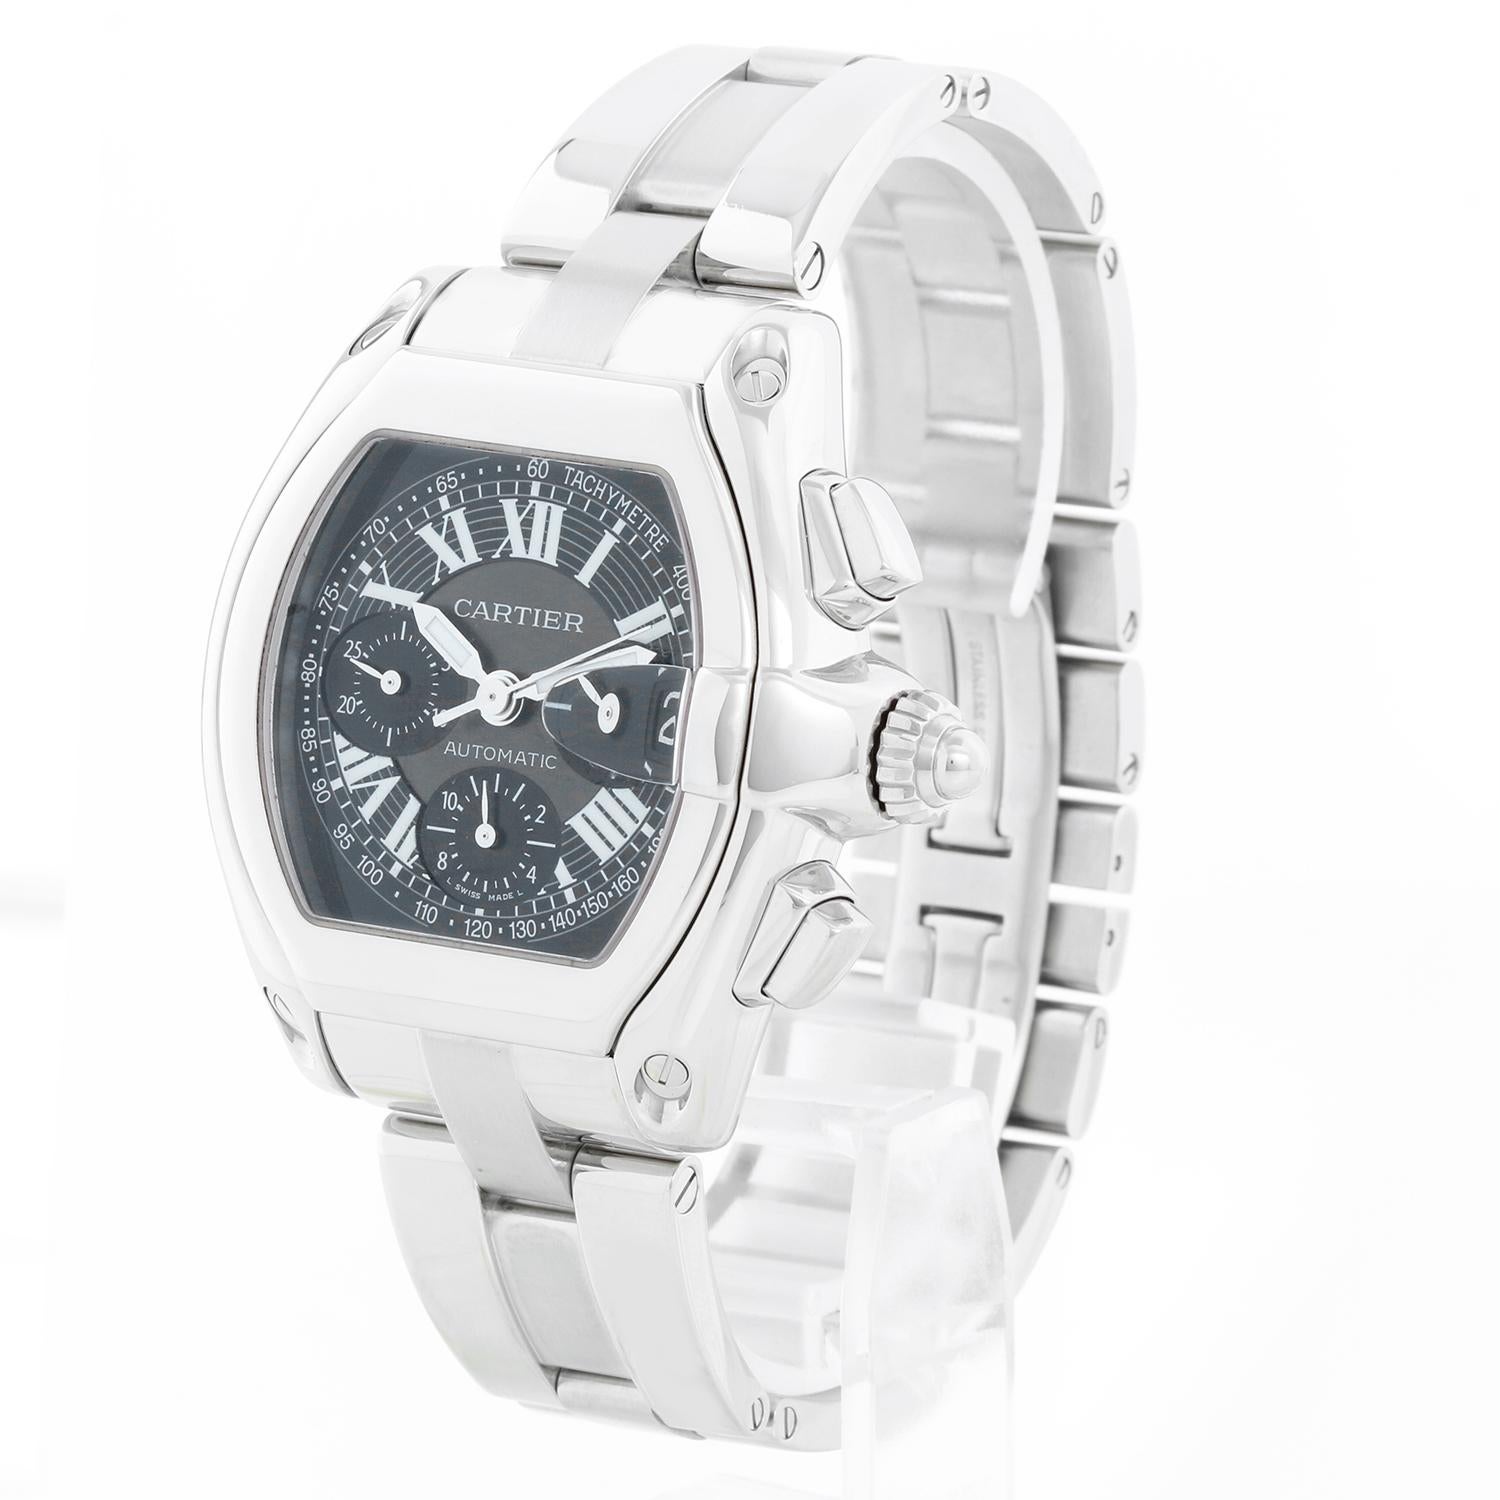 Cartier Roadster Chronograph Stainless Steel Men's Watch W62007X6 2618 - Automatic winding chronograph with date. Stainless steel case (43mm x 48mm). Black dial with white Roman numerals; date at 3 o'clock. Stainless steel Cartier bracelet with